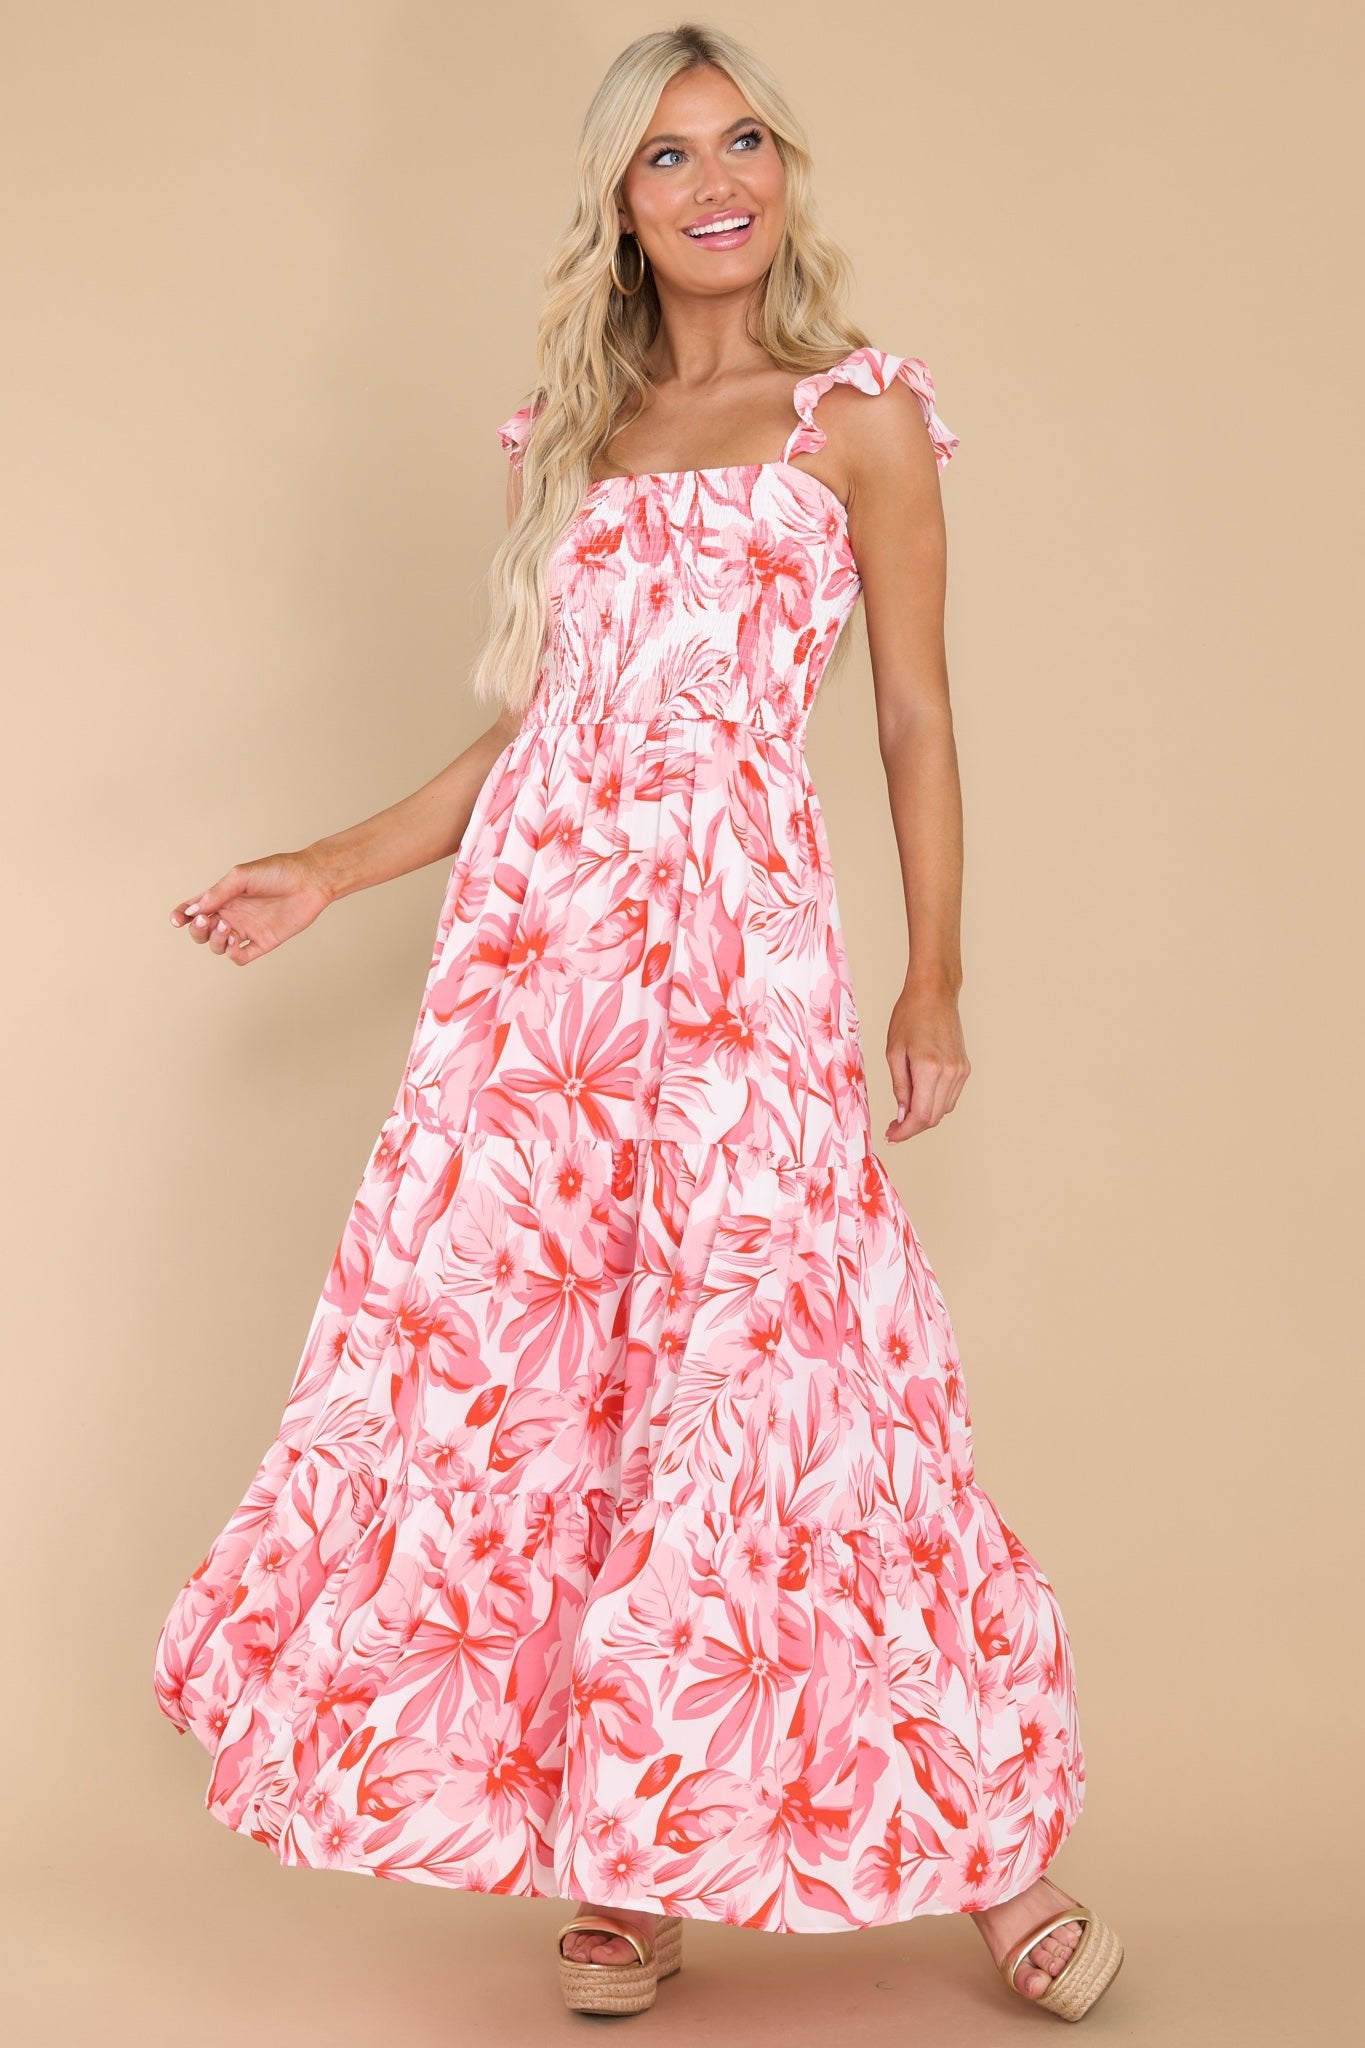 Sunset Sway Pink Dress - Red Dress